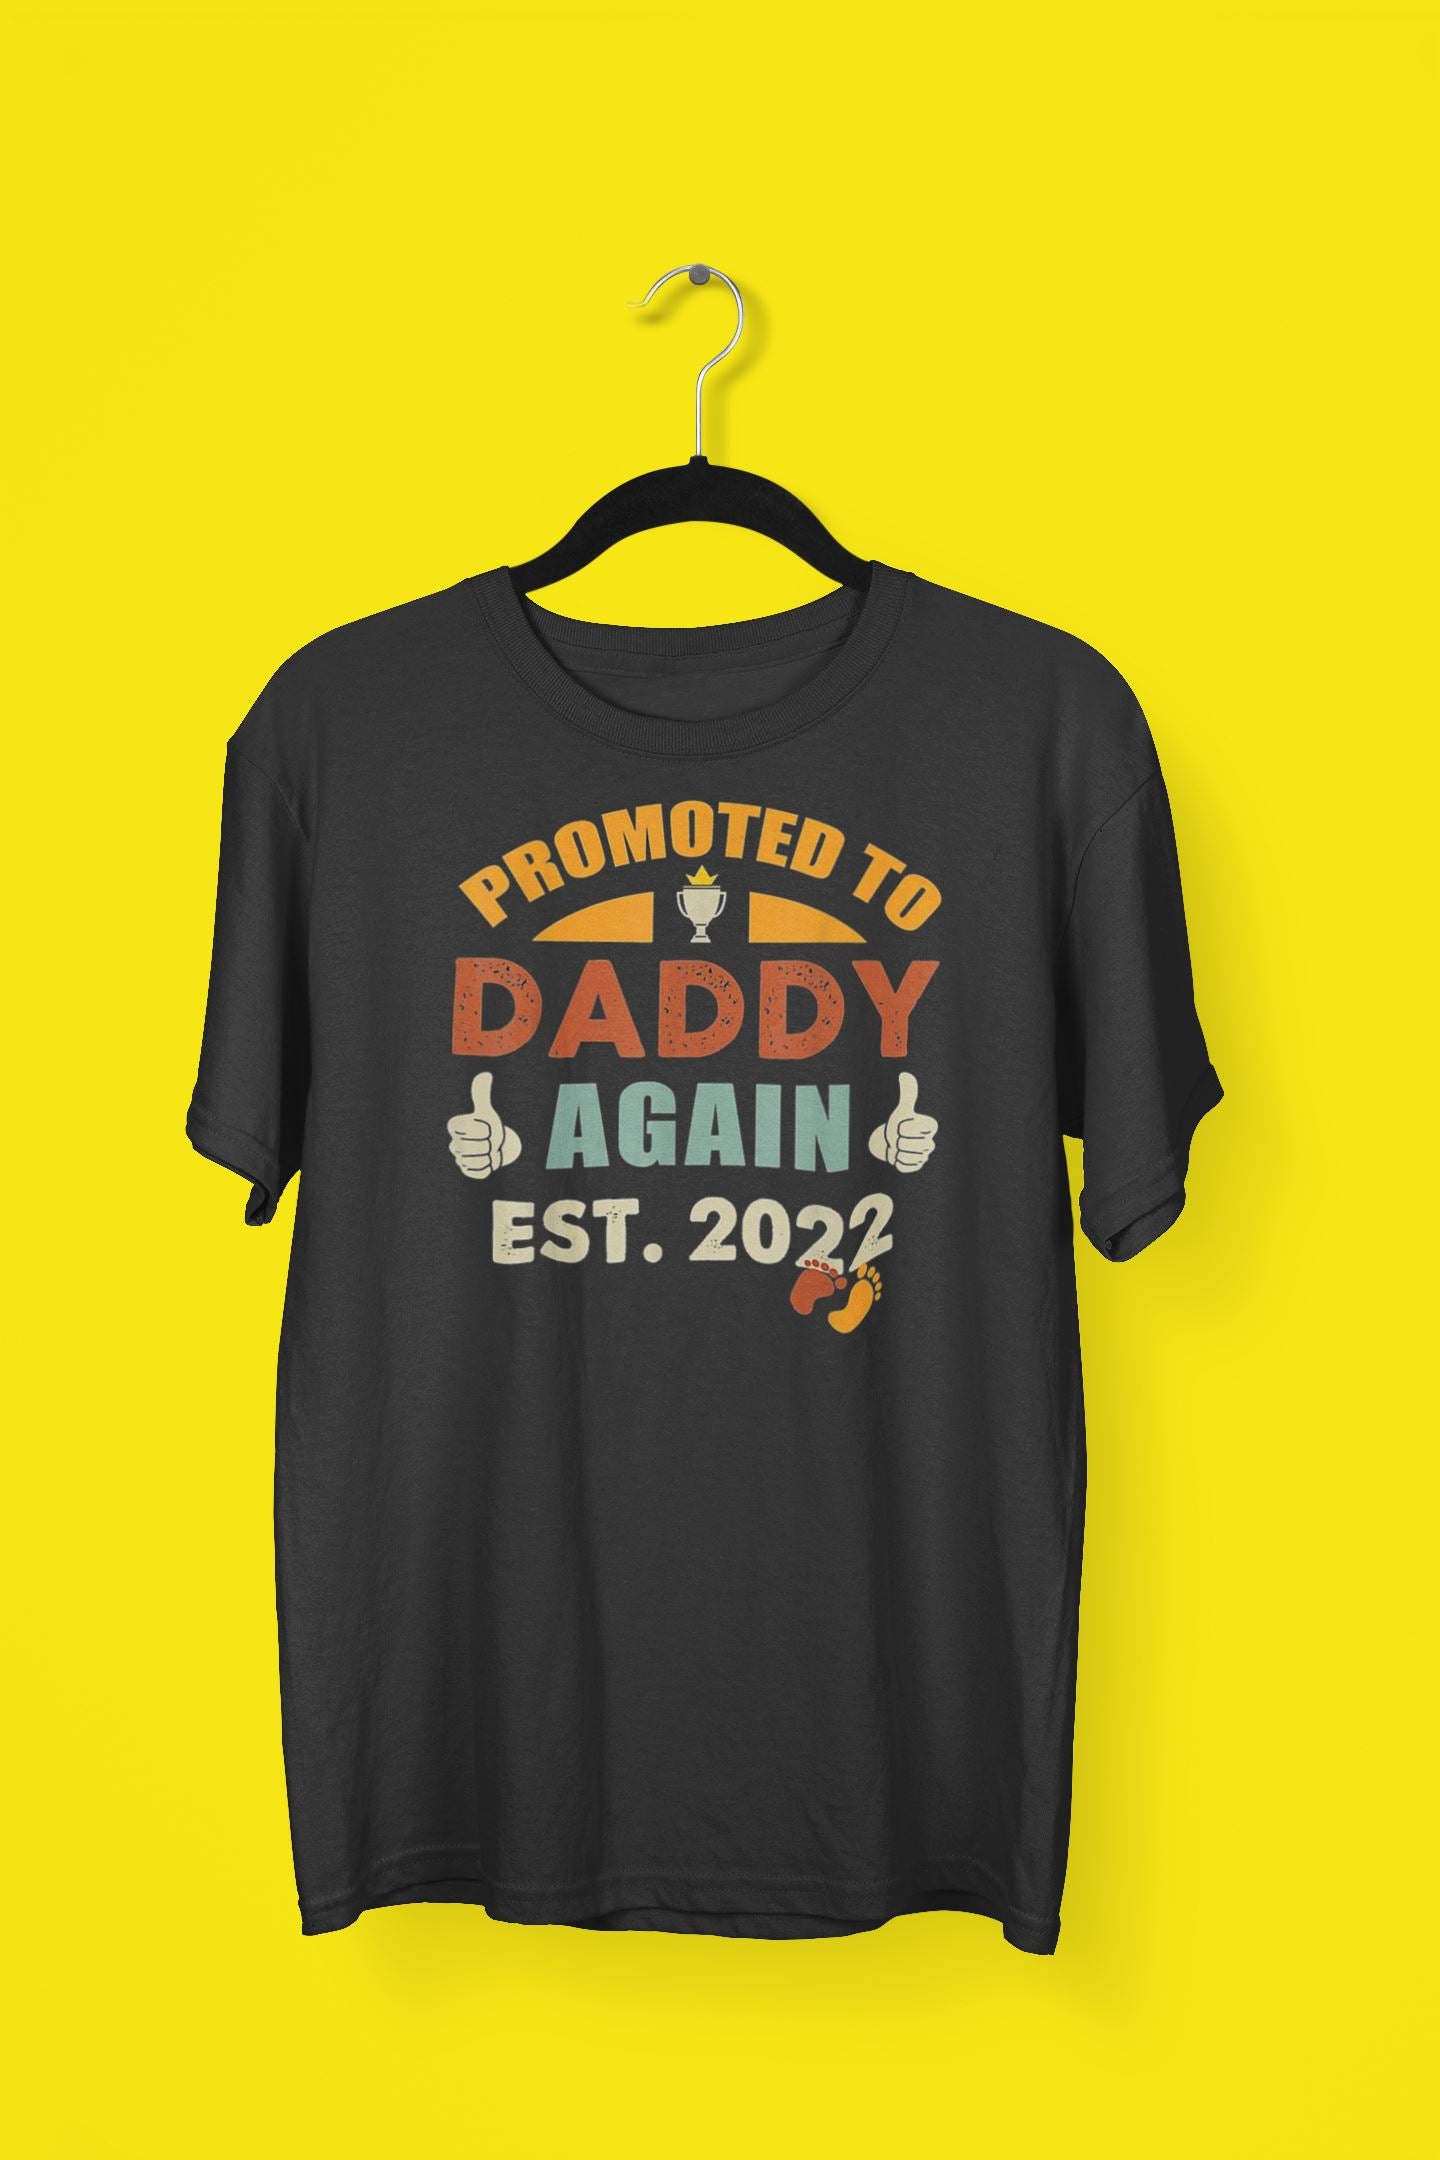 Promoted to Daddy Again Est. 2022 Exclusive Black T Shirt for Men freeshipping - Catch My Drift India